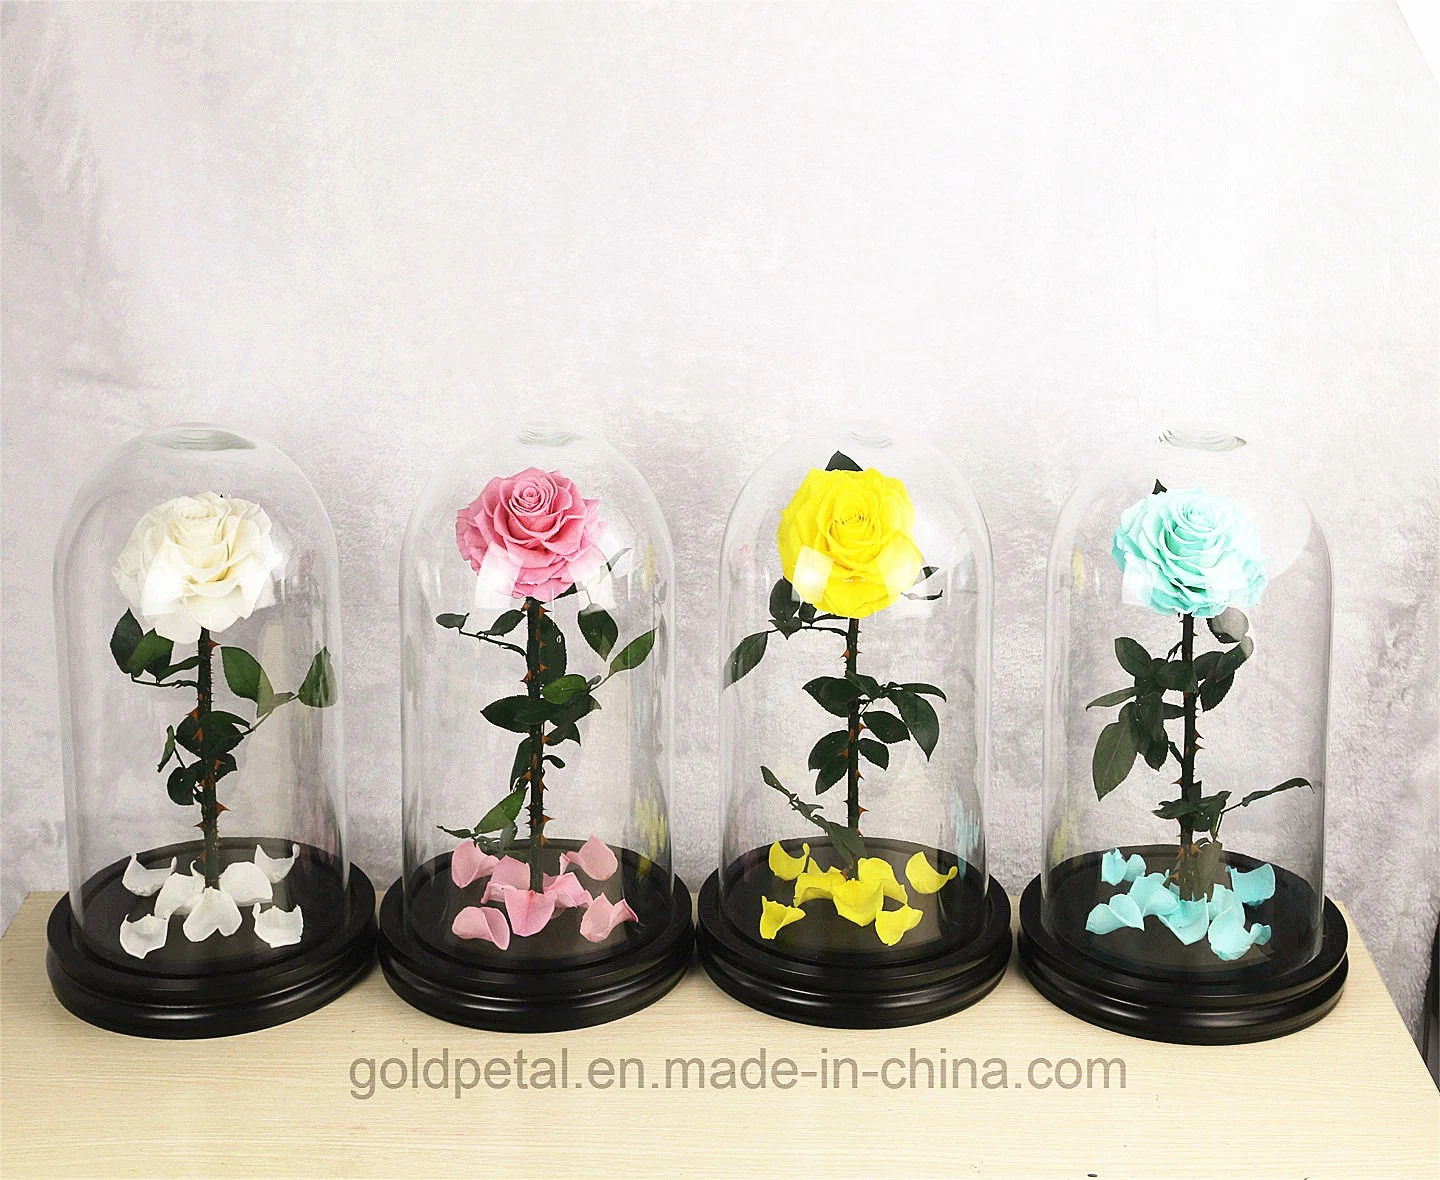 Hot Sell 3-4 Years Lasting Preserved Yellow Rose Flowers in Glass Dome for Christams Gifts